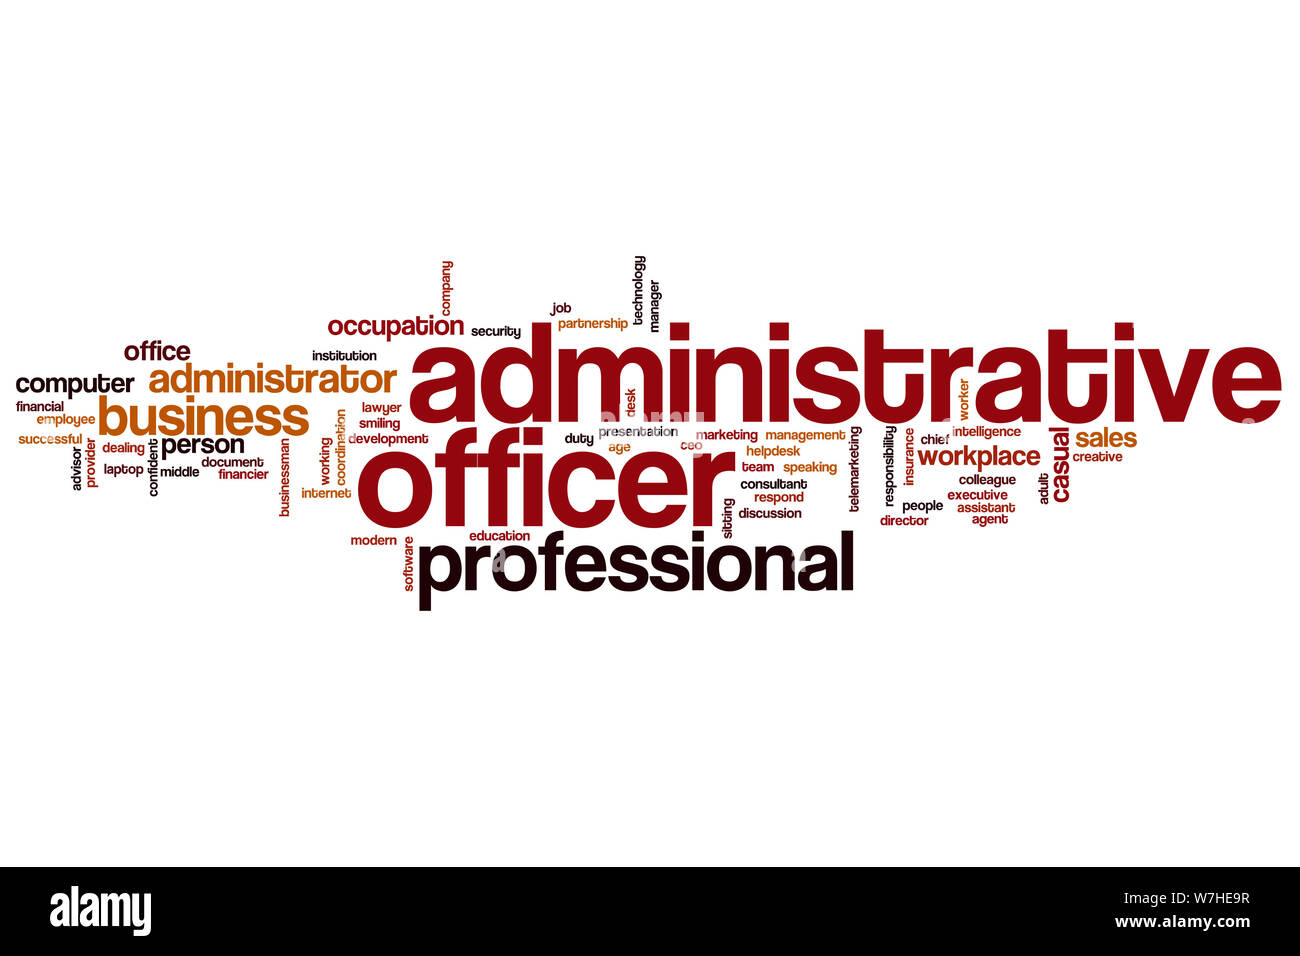 Administrative officer word cloud concept Stock Photo